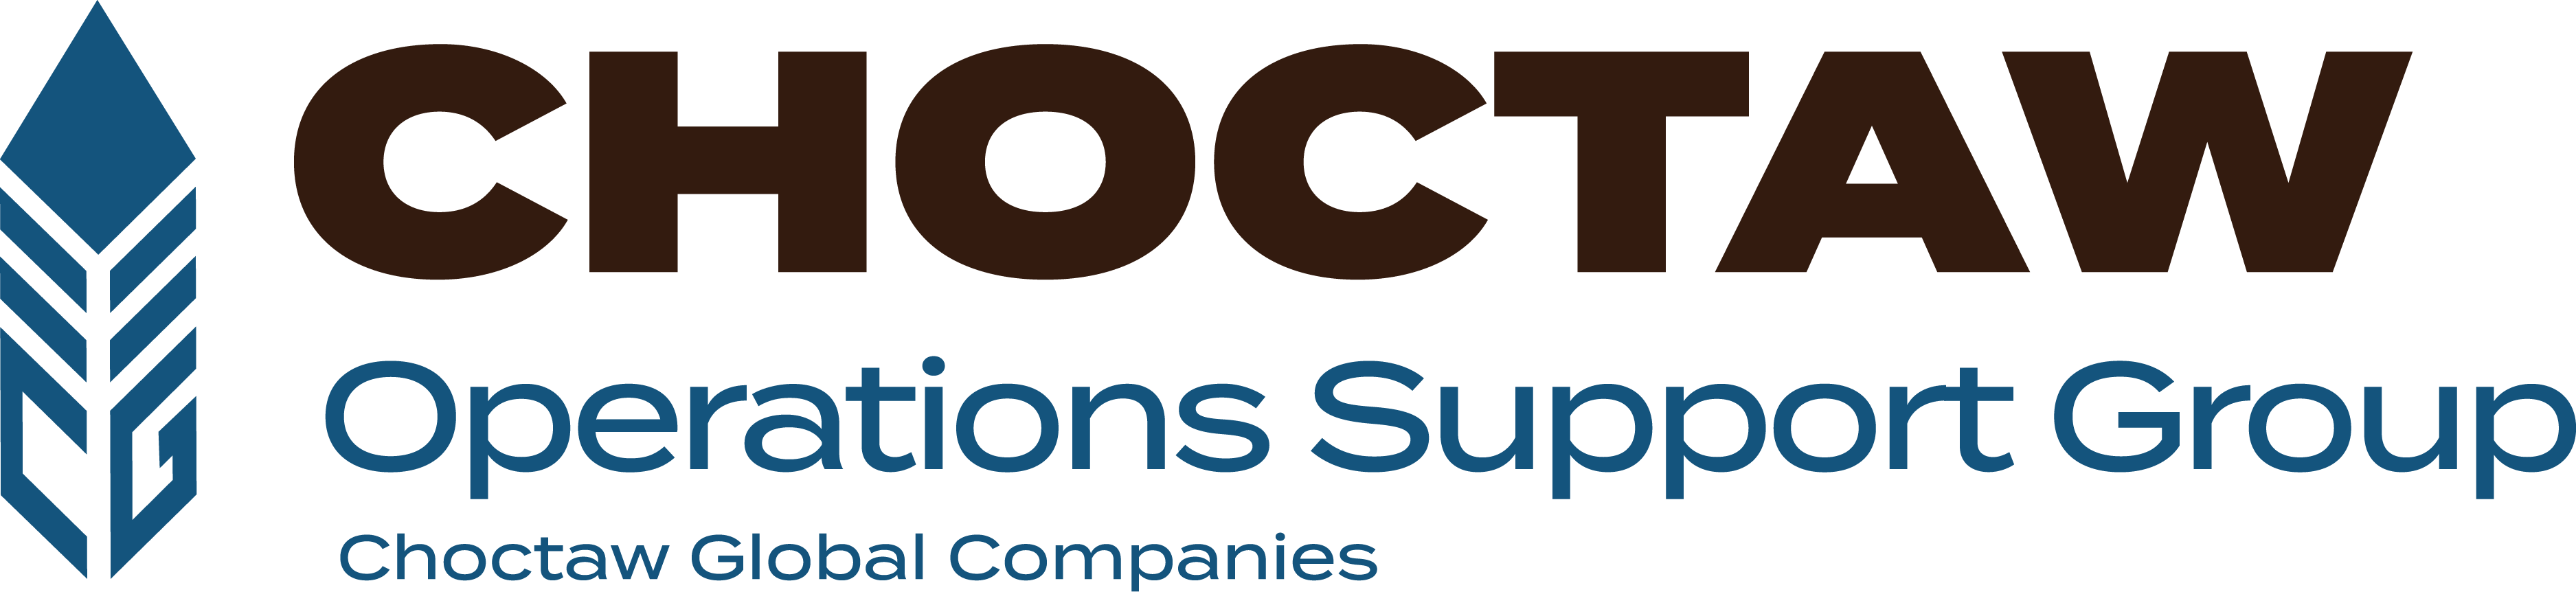 Choctaw Operations Support Group logo